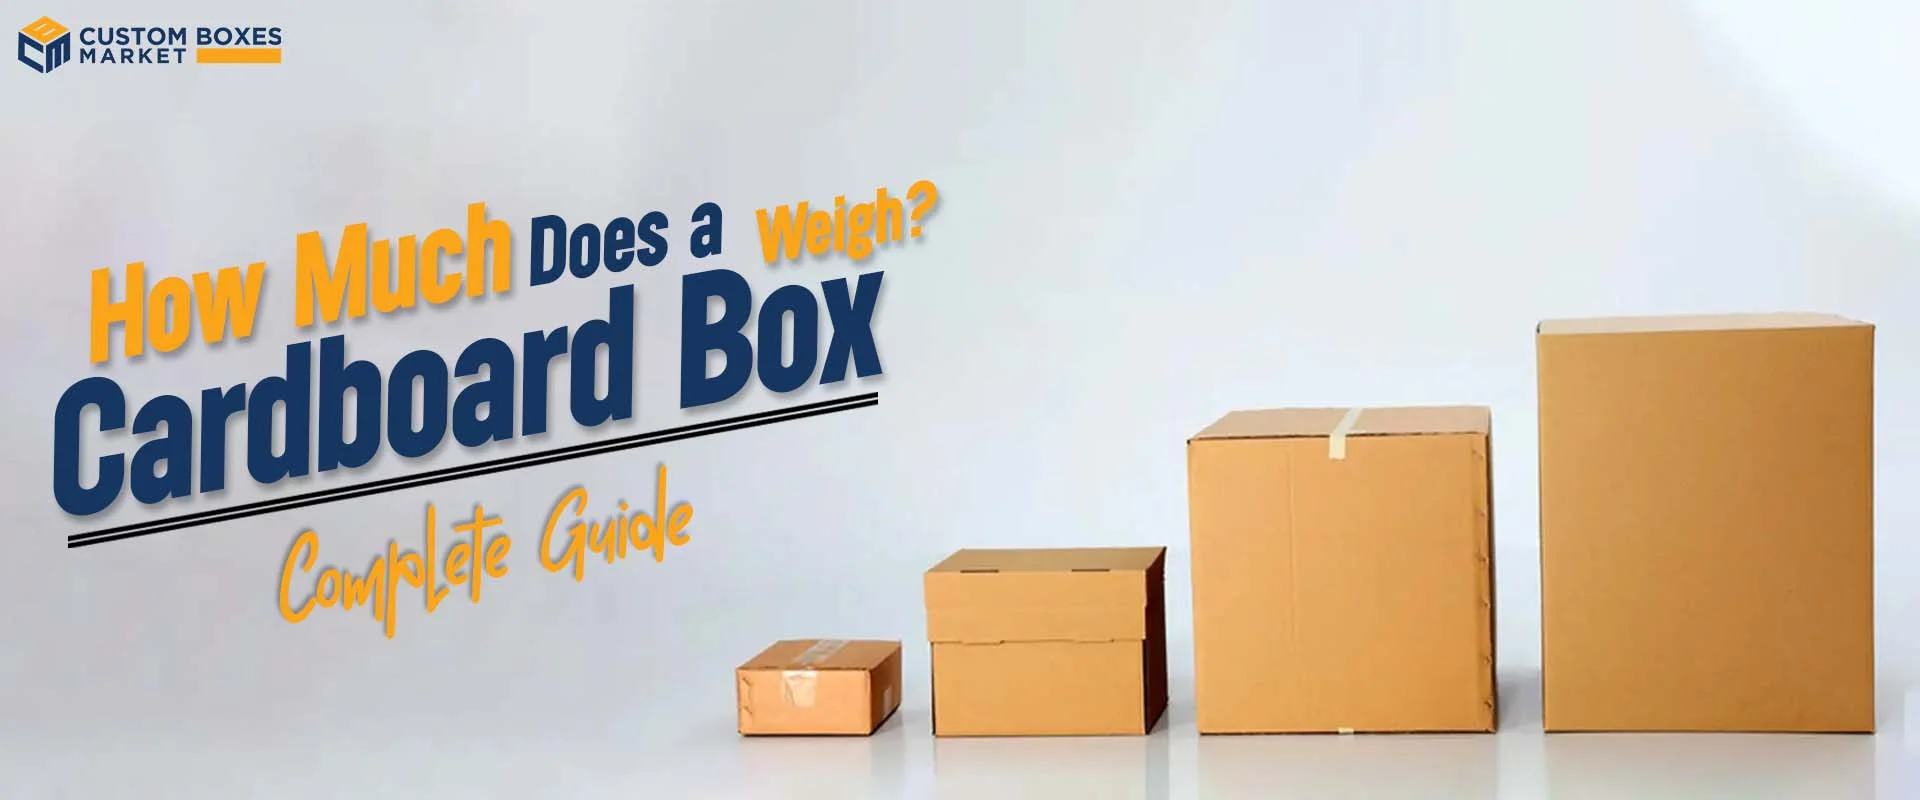 How Much Does a Cardboard Box Weigh? Complete Guide